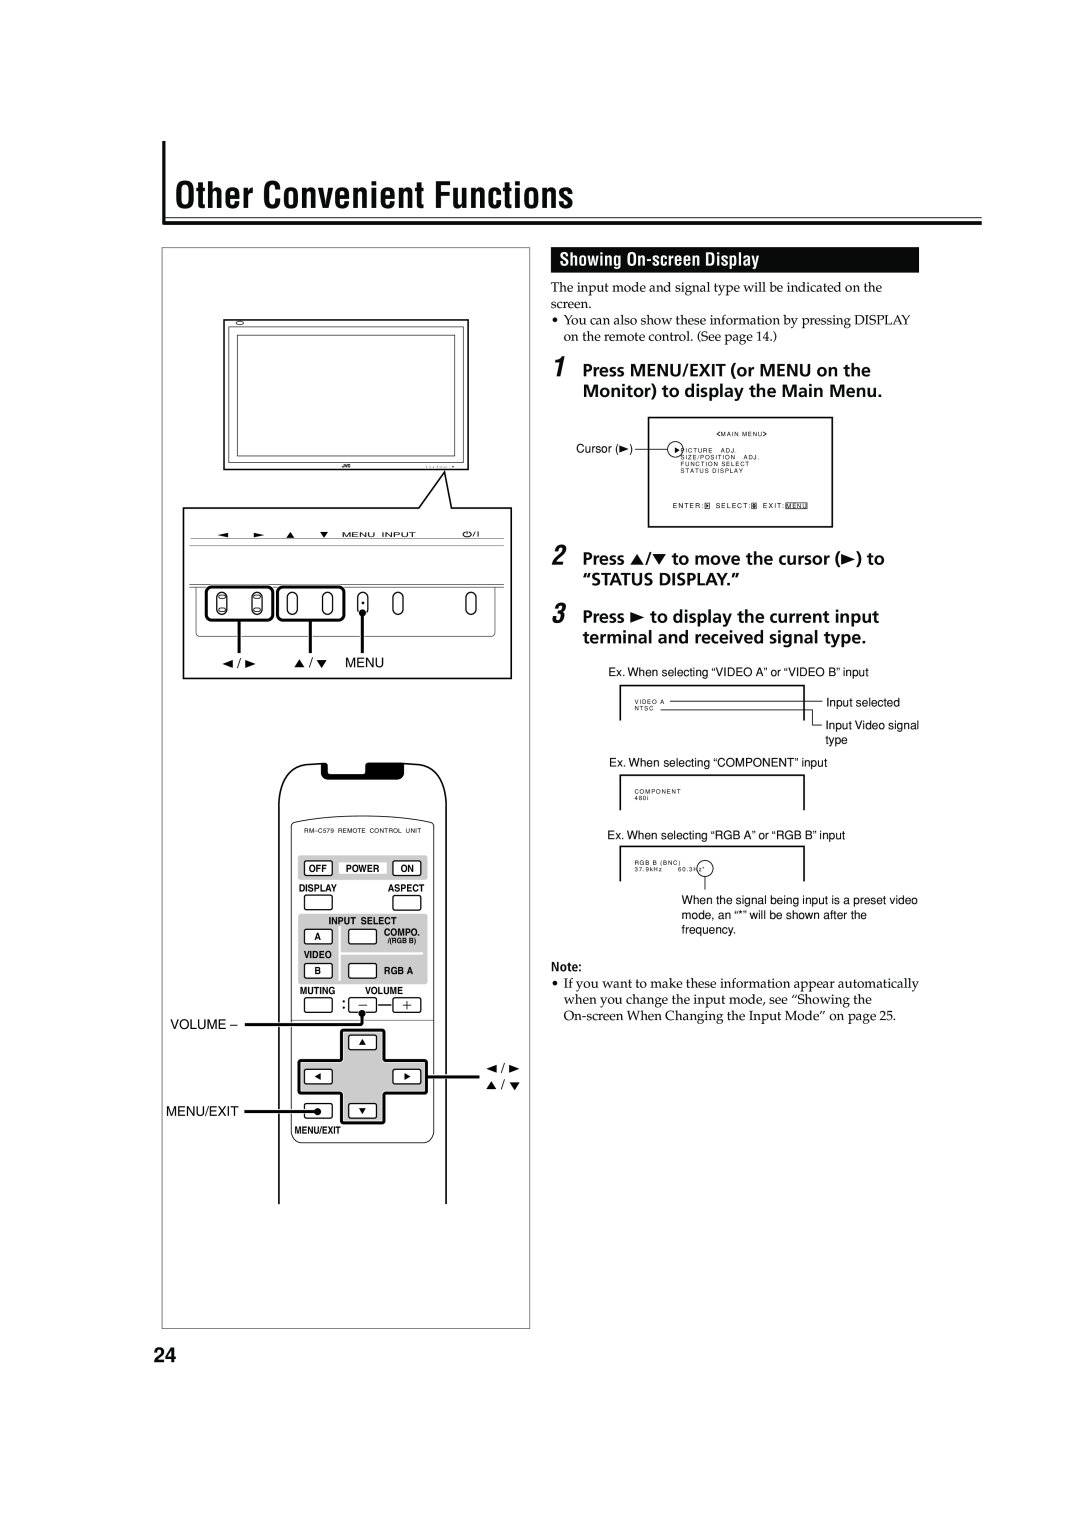 JVC GM-V42C, LCT1616-001A, 0204MKH-MW-VP manual Other Convenient Functions, Showing On-screen Display 